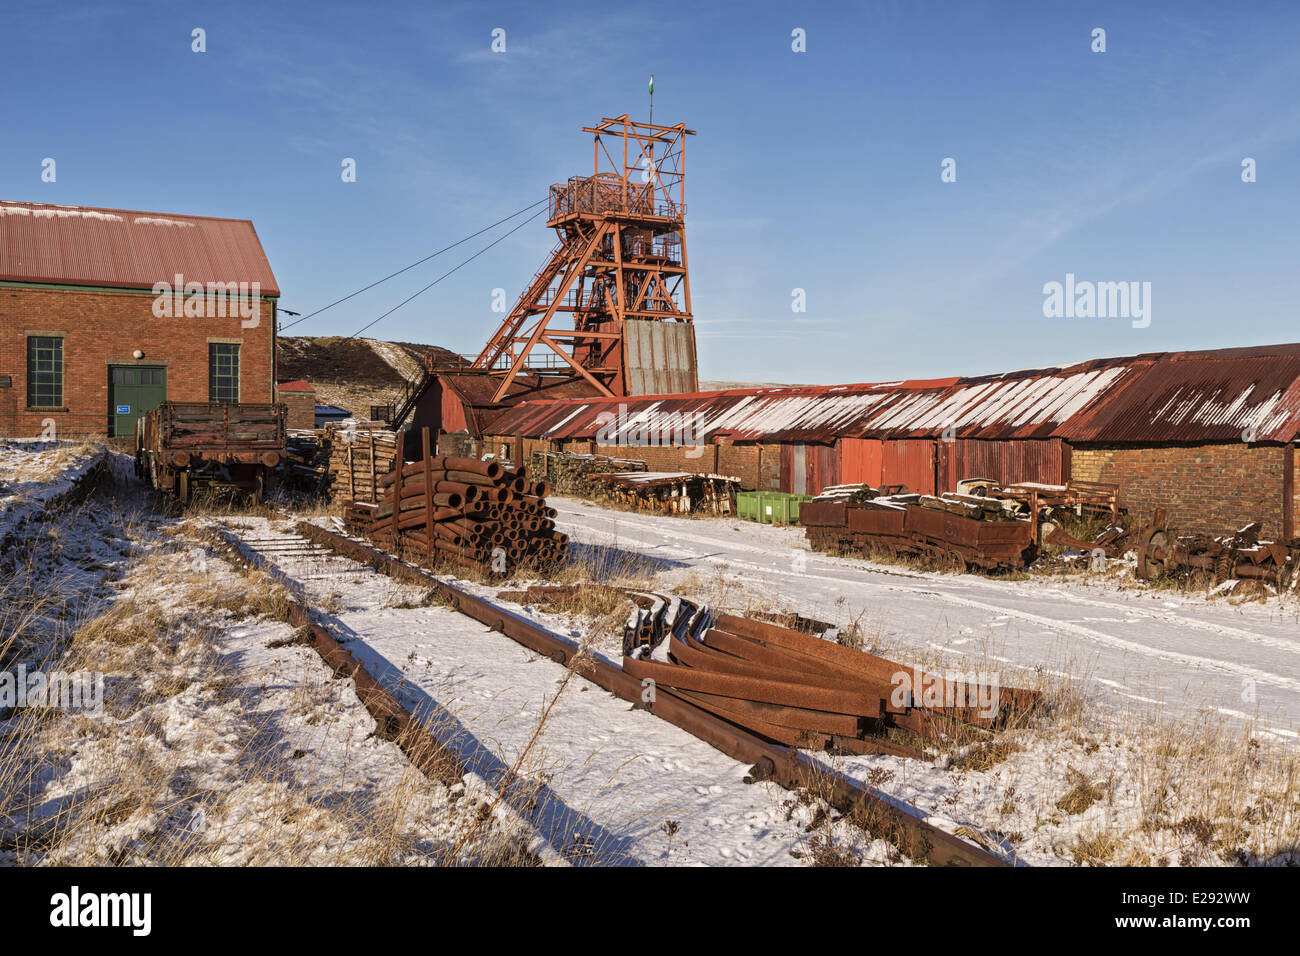 Coal mine industrial heritage museum in snow, Big Pit National Coal Museum, Blaenavon, Torfaen, South South Wales, January Stock Photo